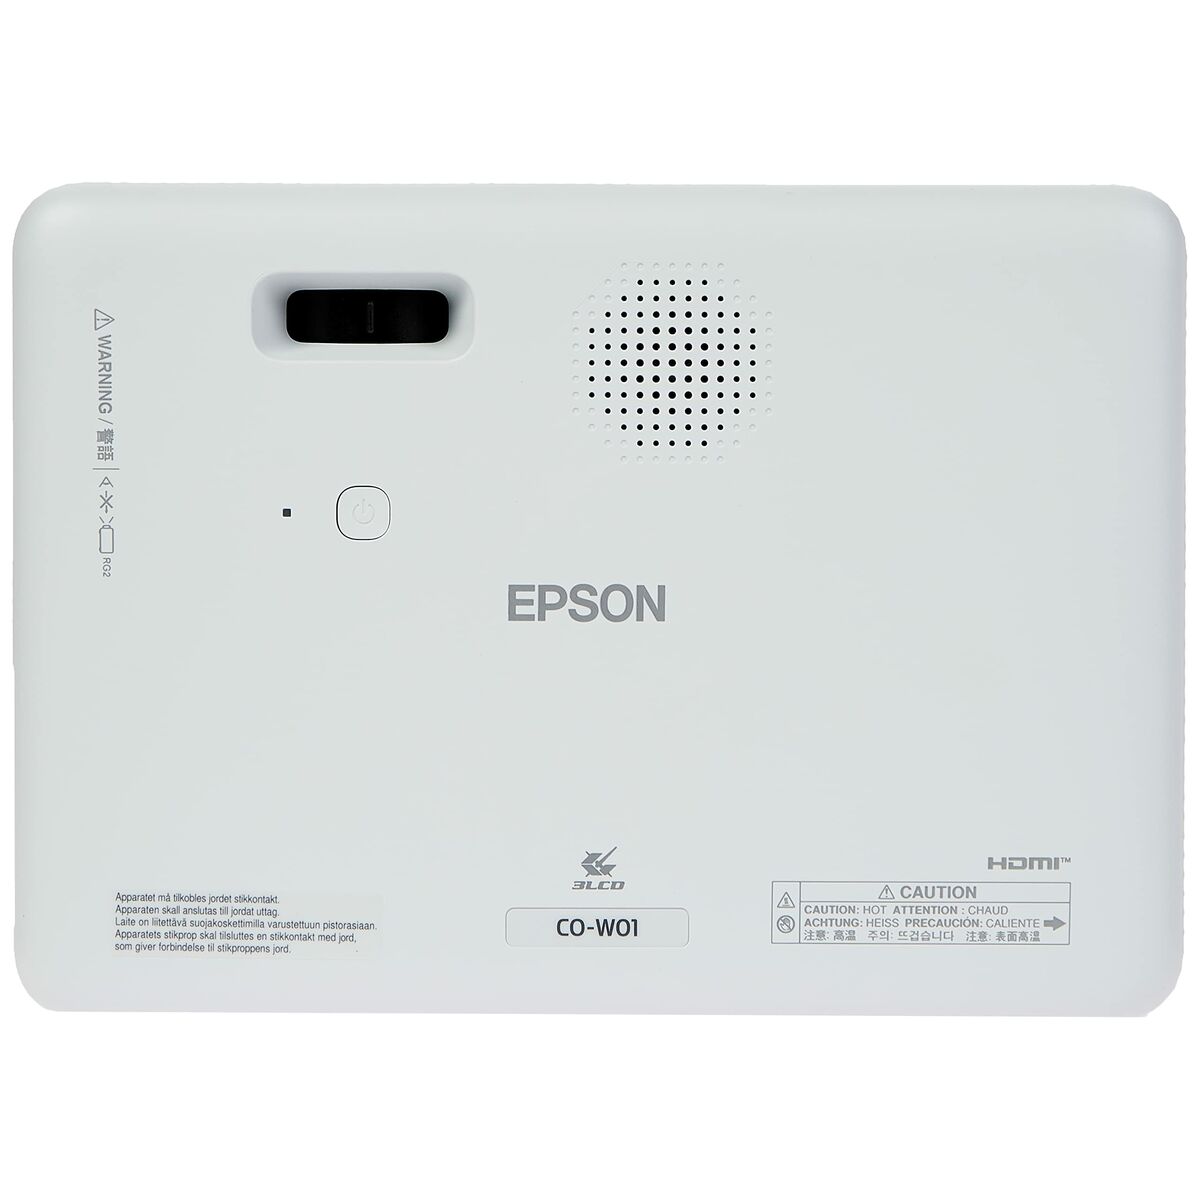 Projector Epson CO-W01 3000 lm